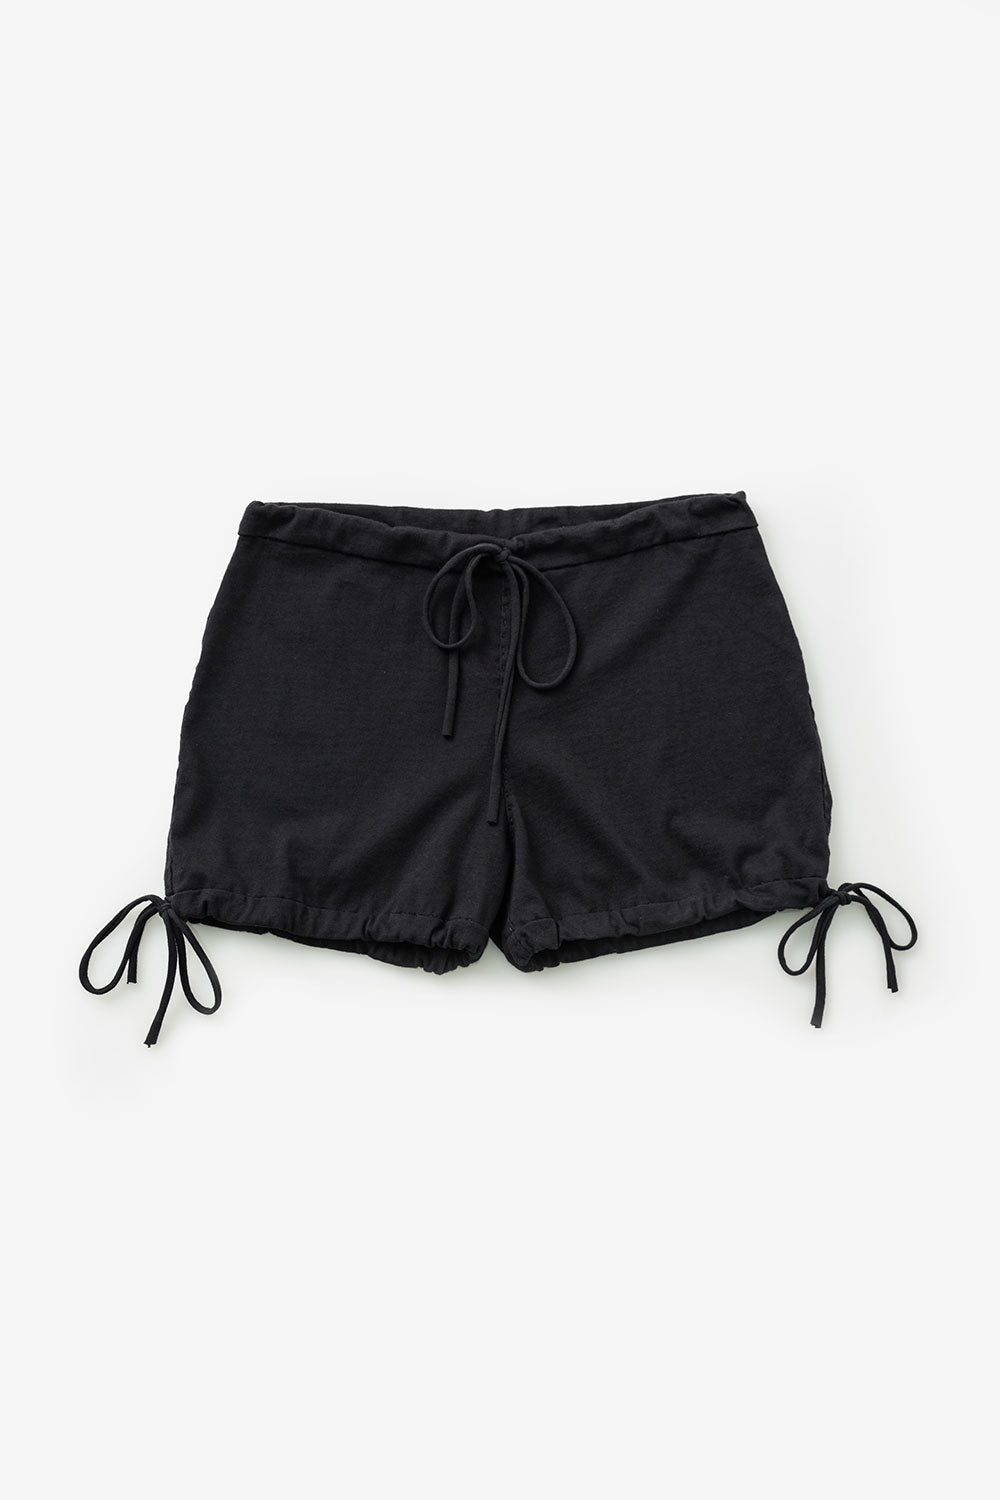 The School of Making The Drawstring Pant Pattern Hand-Sewn Drawstring Shorts for Women